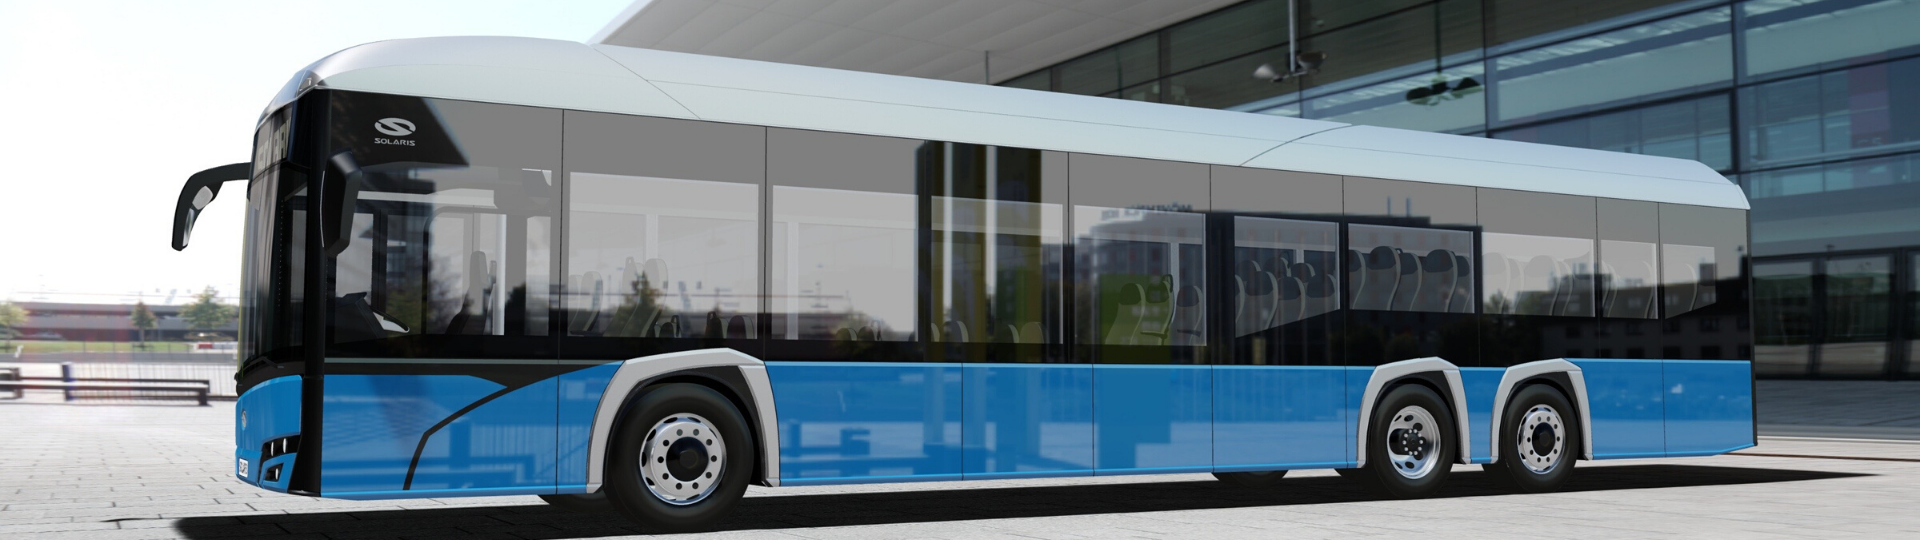 Solaris is going to present a new 15 meter electric bus!